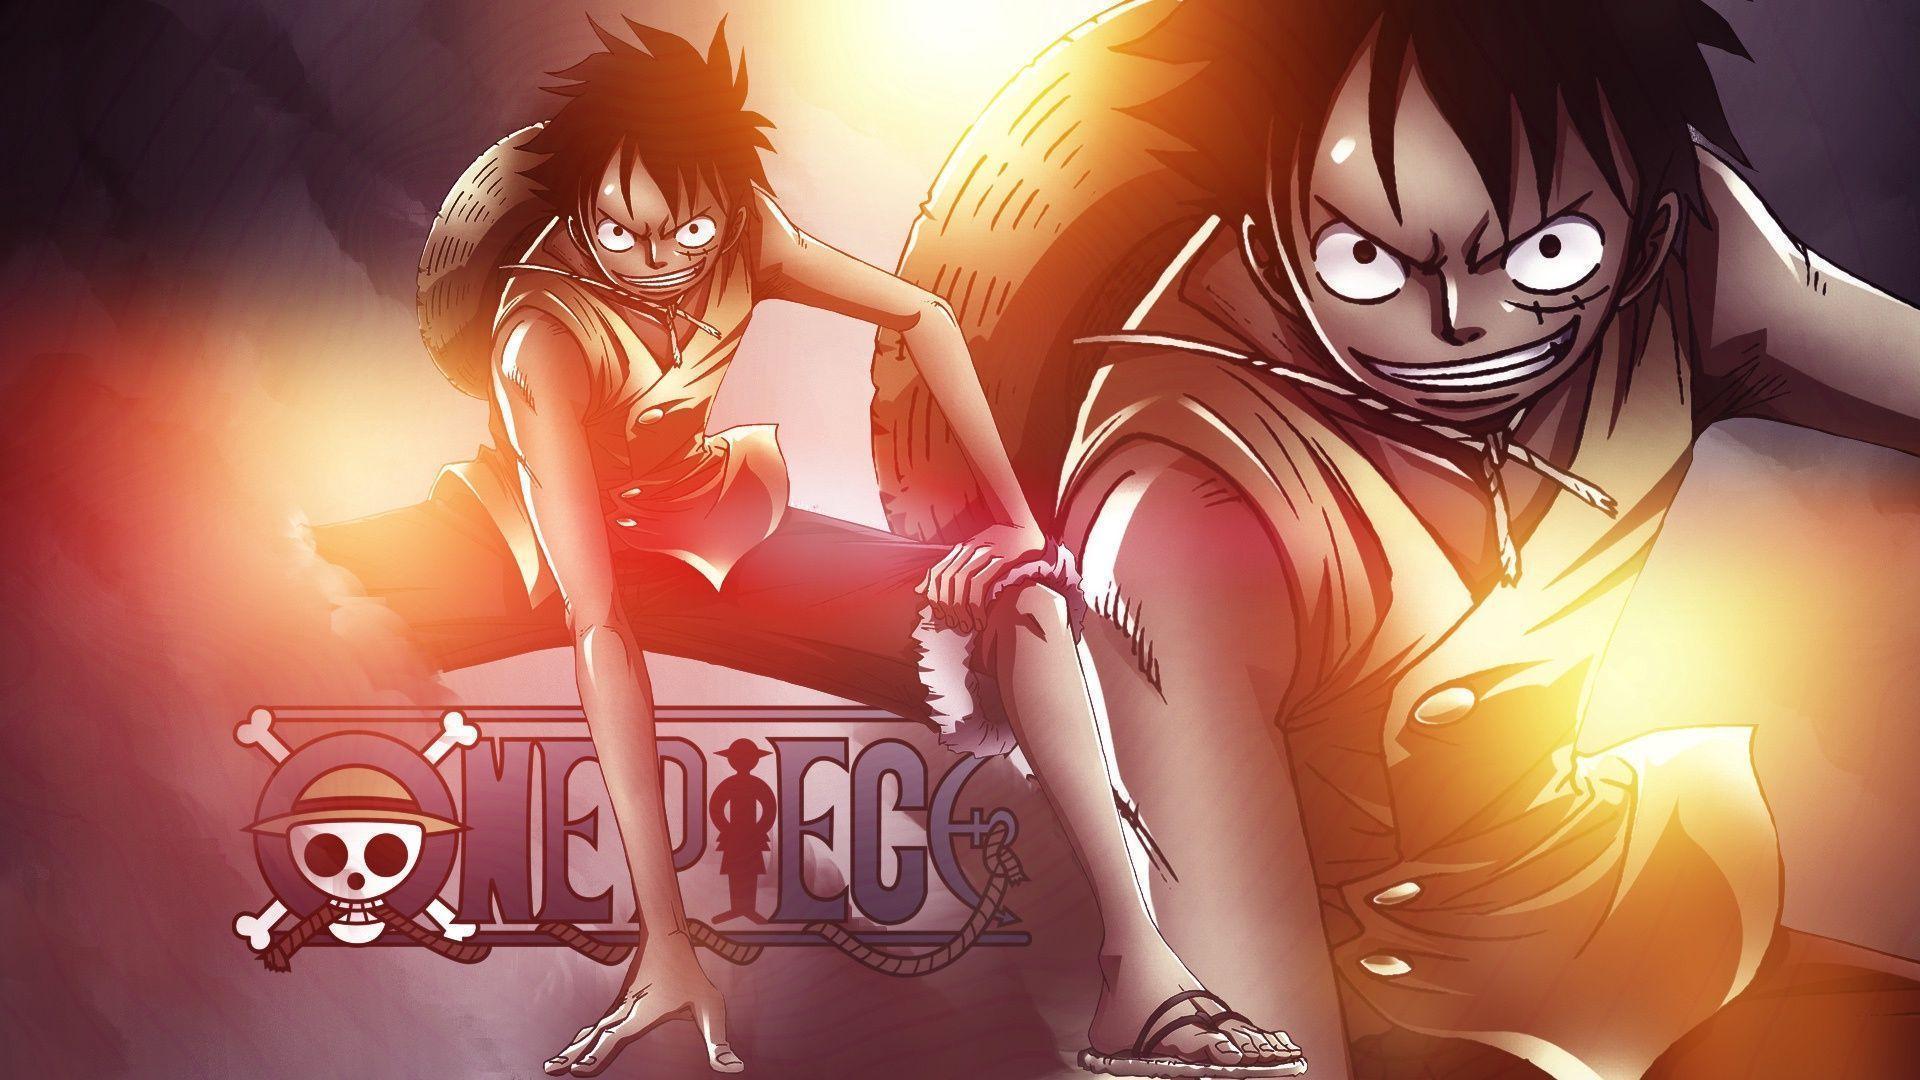 HD Wallpaper for One Piece Lovers